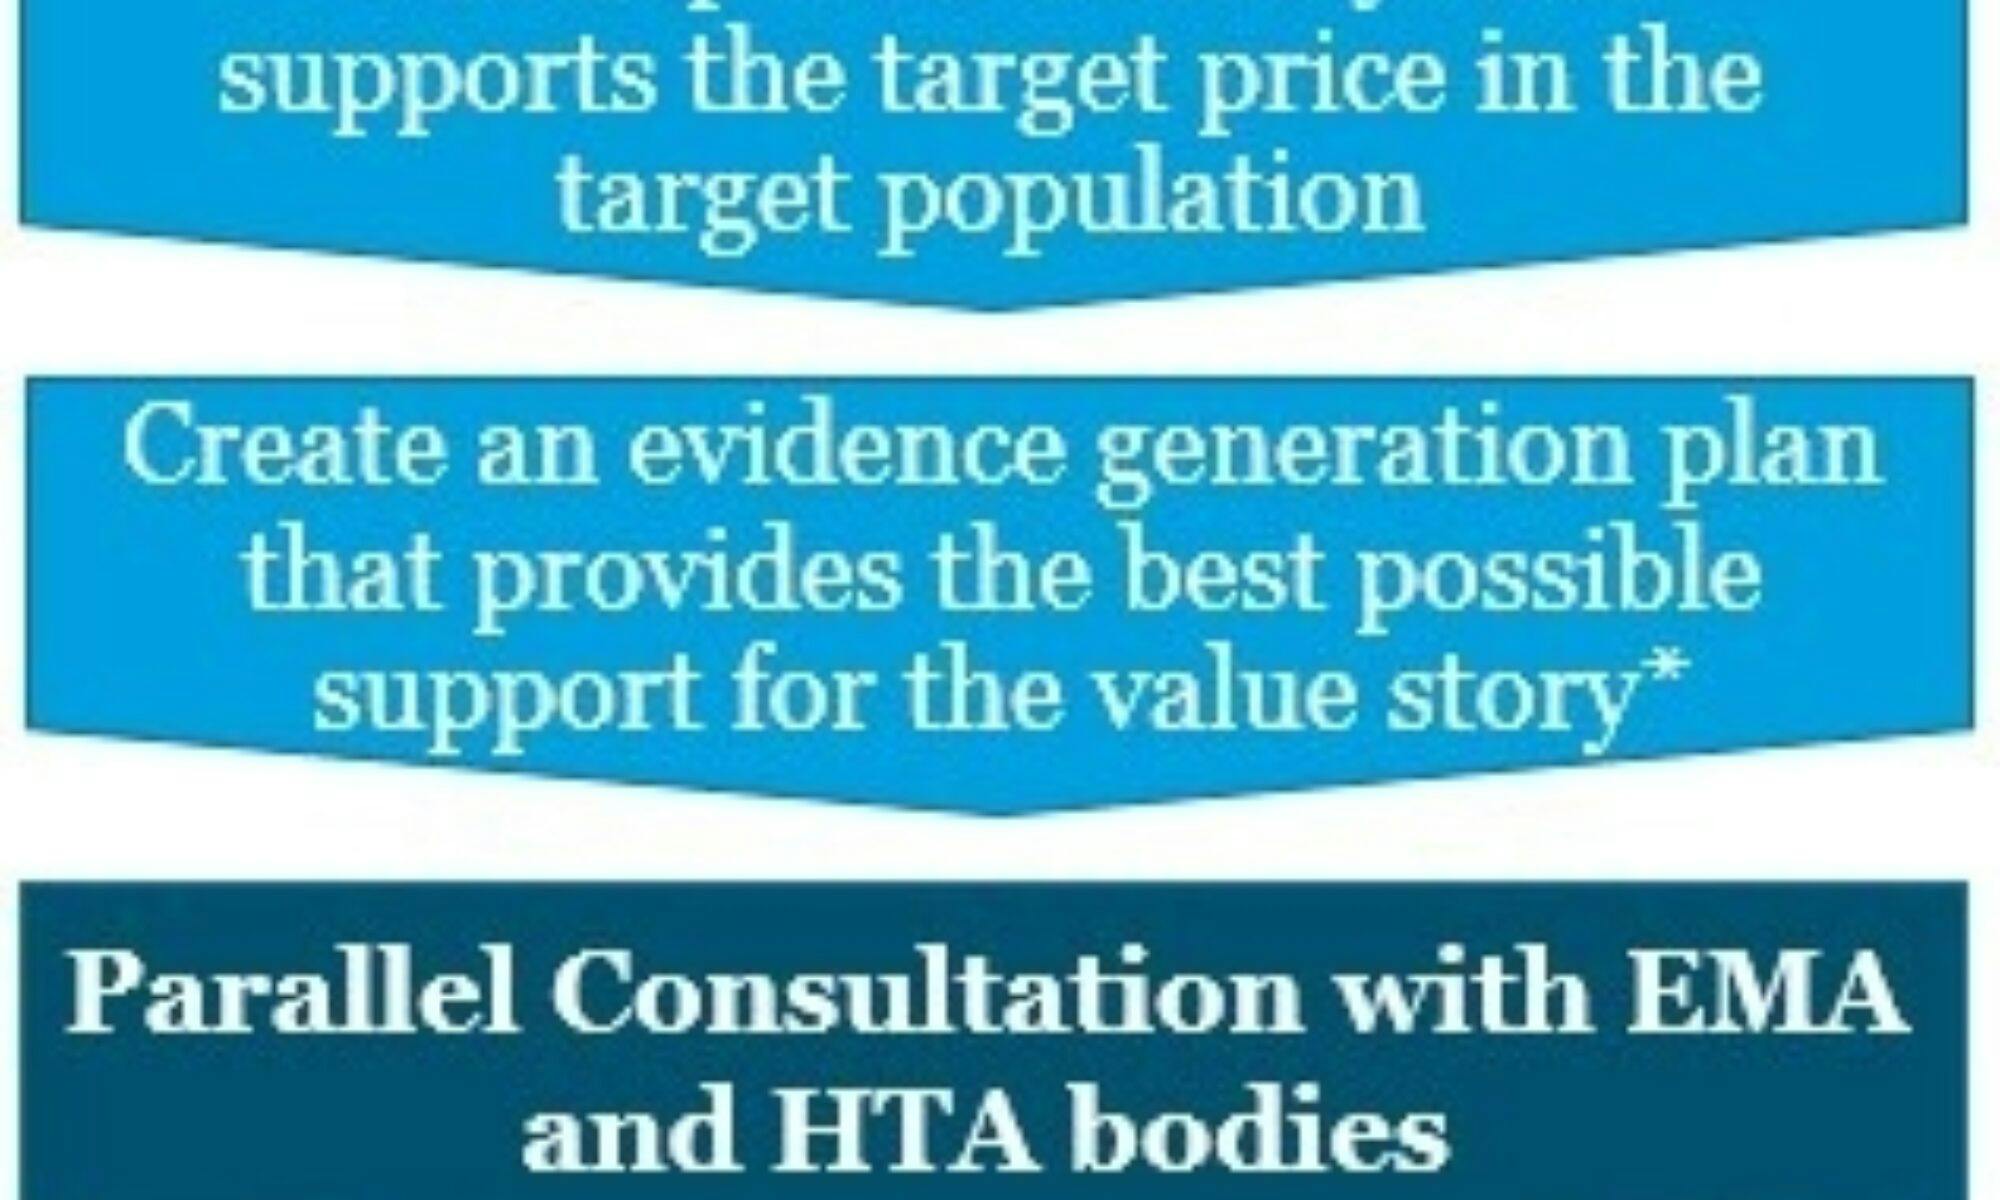 Enabling a valuable engagement with EMA and HTA bodies as part of the Parallel Consultation procedure